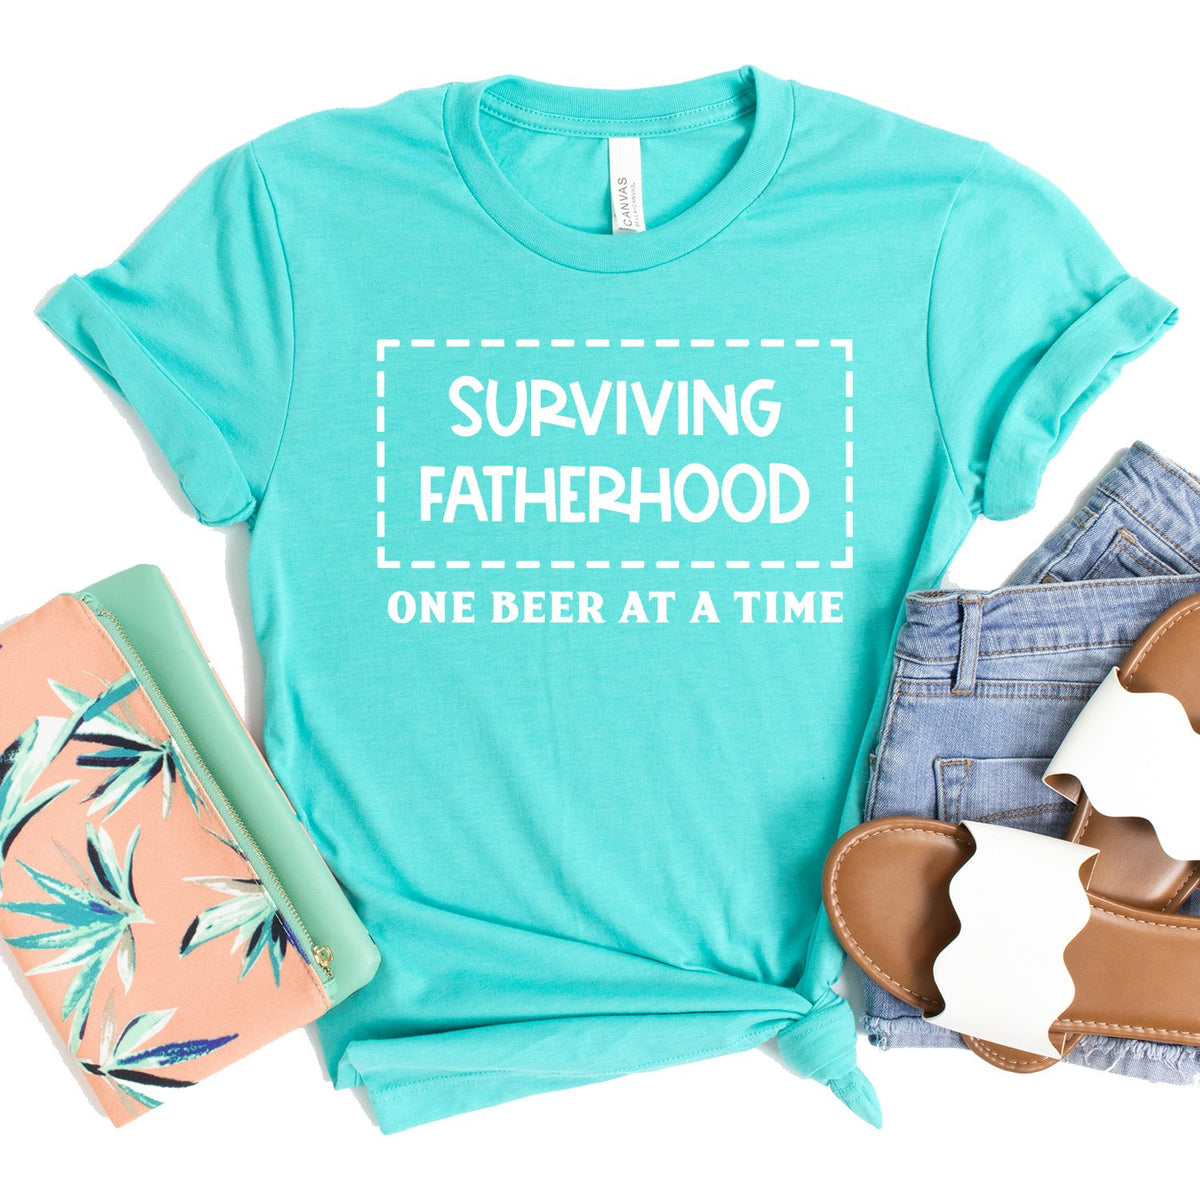 Surviving Fatherhood One Beer At A Time - Short Sleeve Tee Shirt